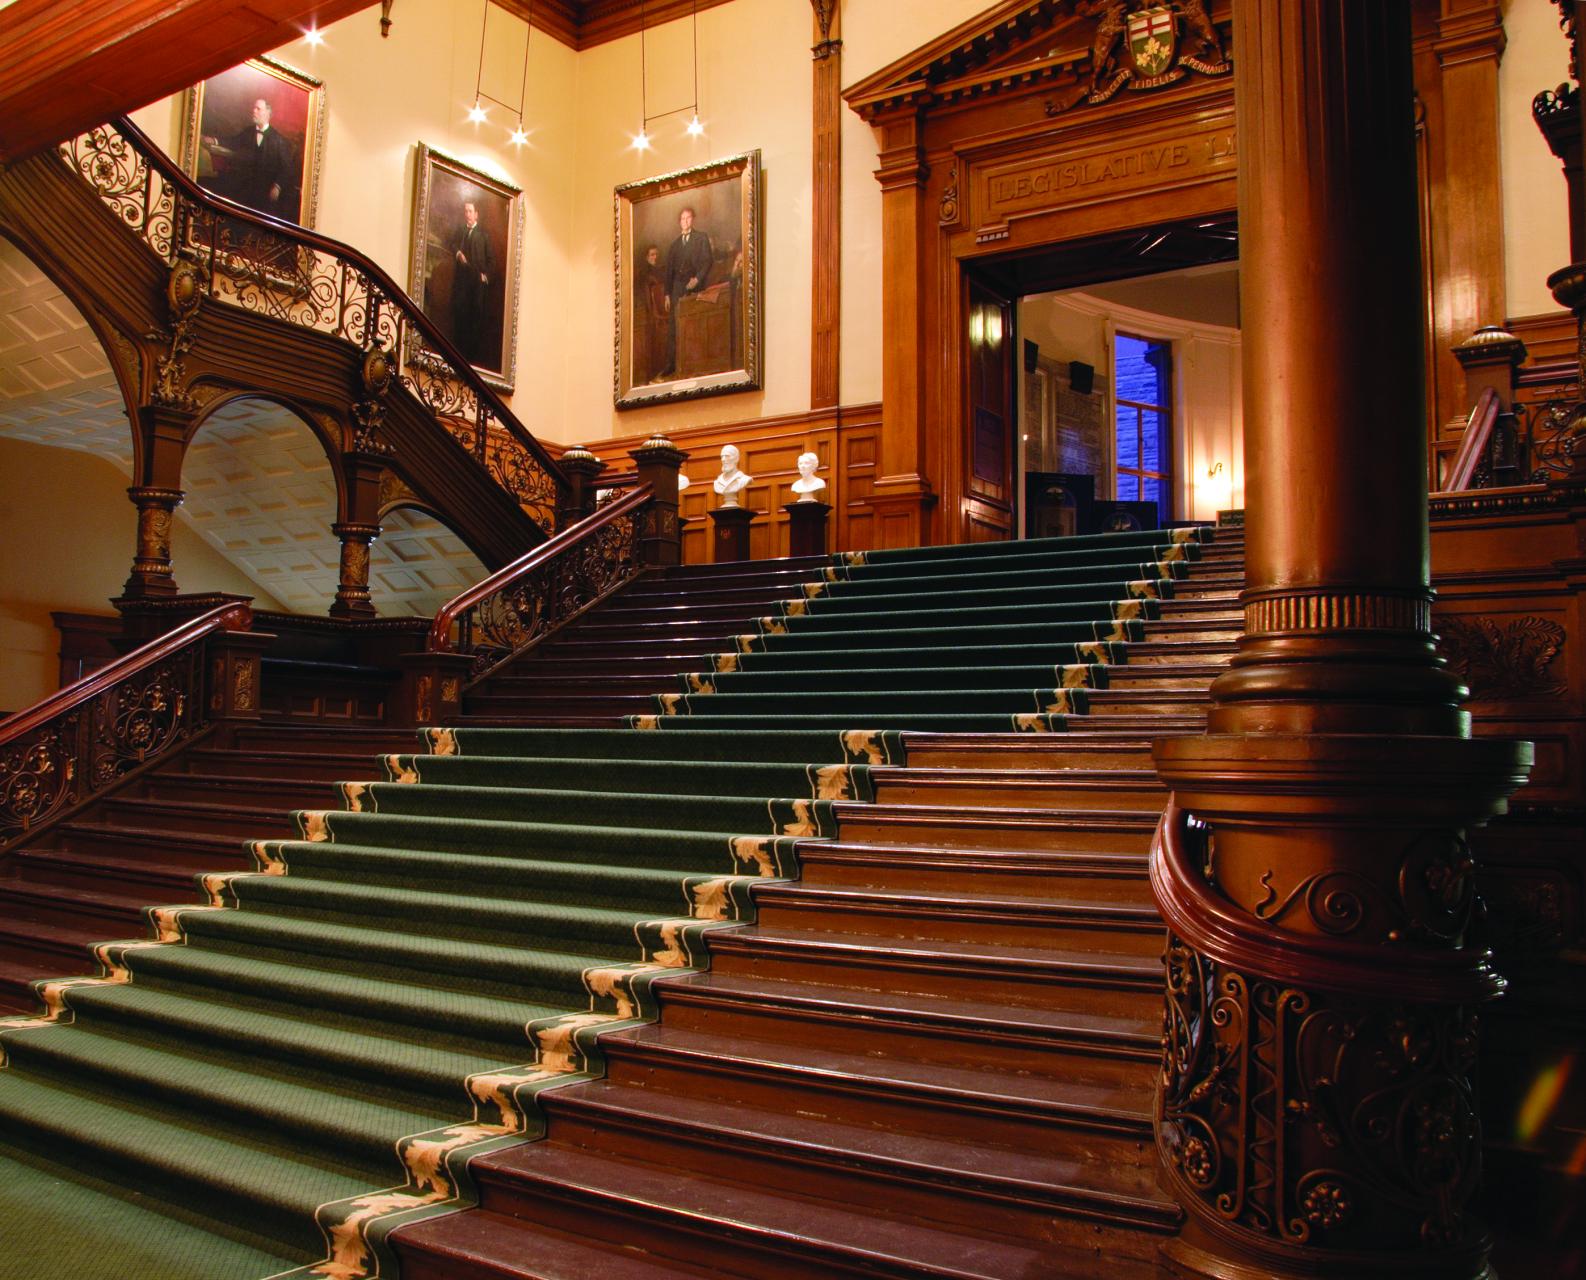 Picture of the grand staircase in the Legislative Building